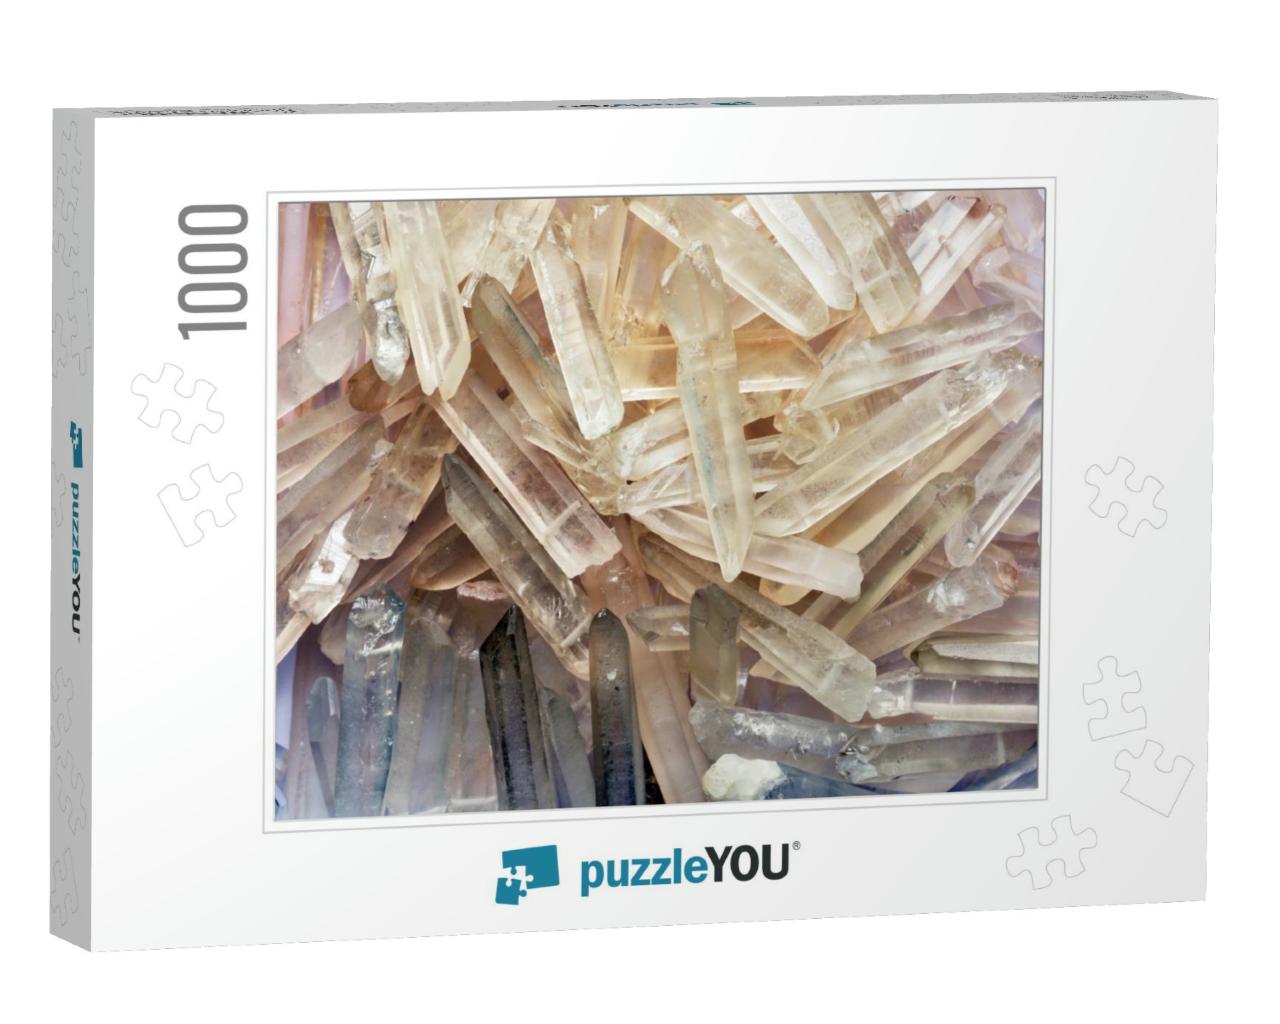 Natural Quartz Crystals in the Form of Ice Shards... Jigsaw Puzzle with 1000 pieces